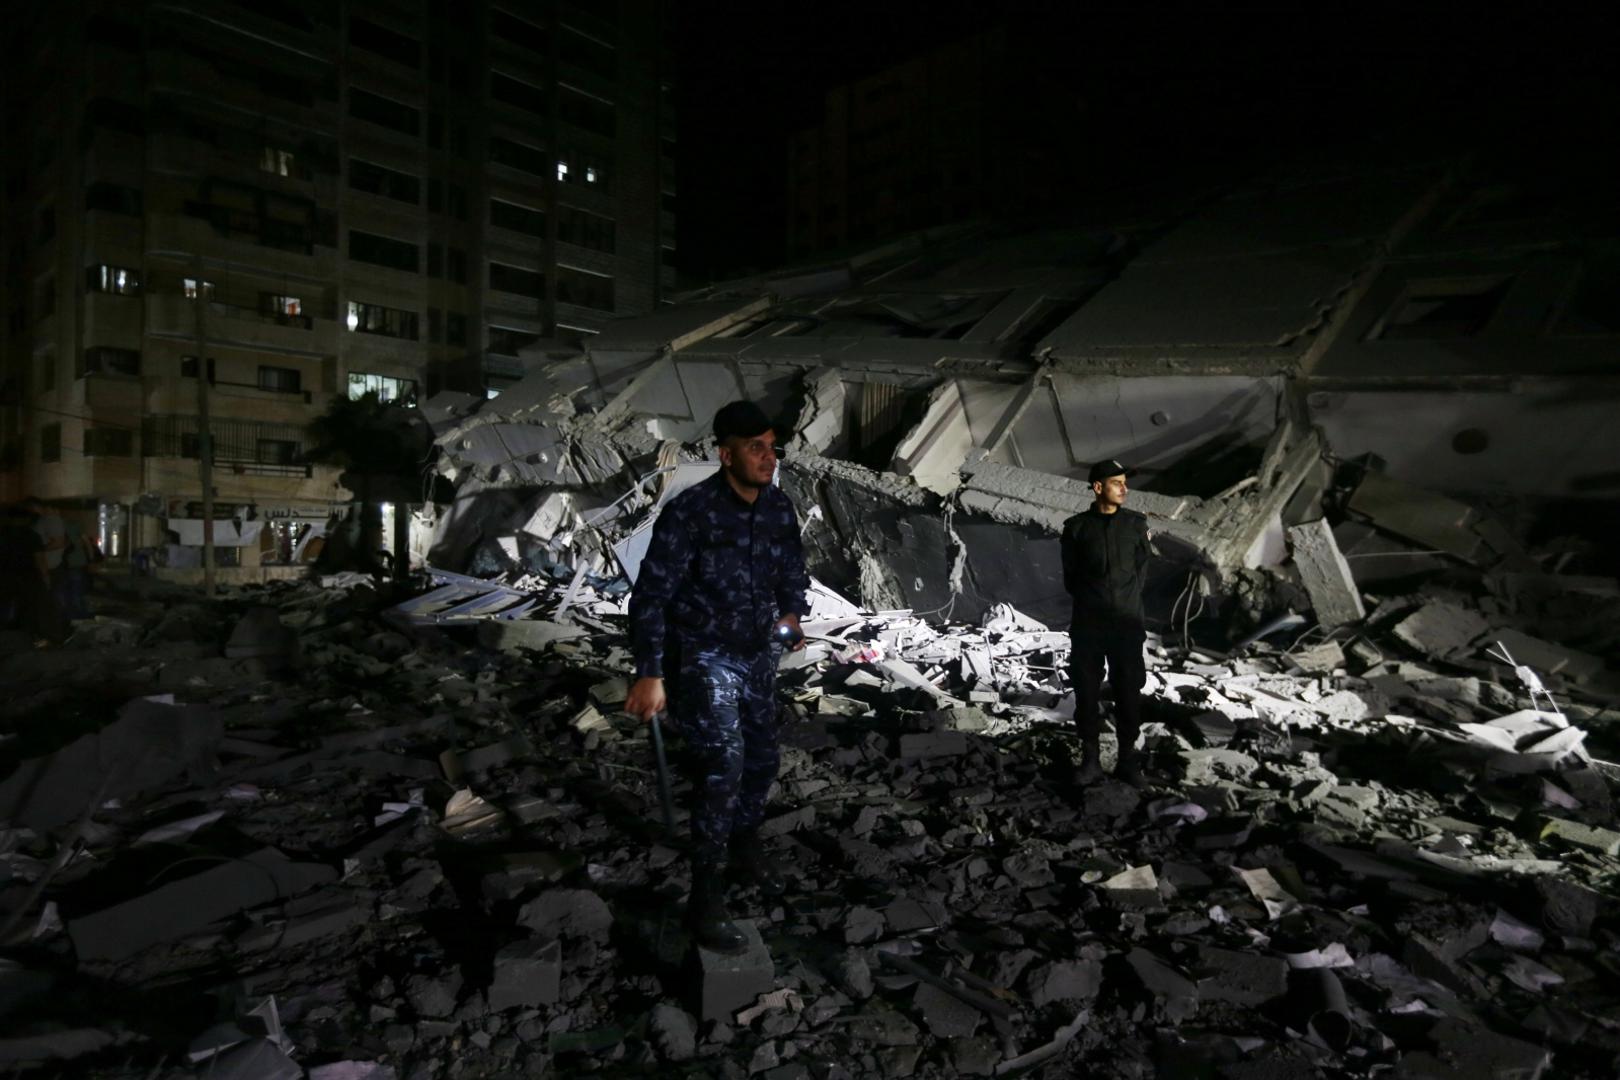 Israeli-Palestinian violence flares up Palestinian policemen stand at the site where a building was destroyed by Israeli air strikes amid a flare-up of Israeli-Palestinian violence, in Gaza City May 11, 2021. REUTERS/Ibraheem Abu Mustafa IBRAHEEM ABU MUSTAFA